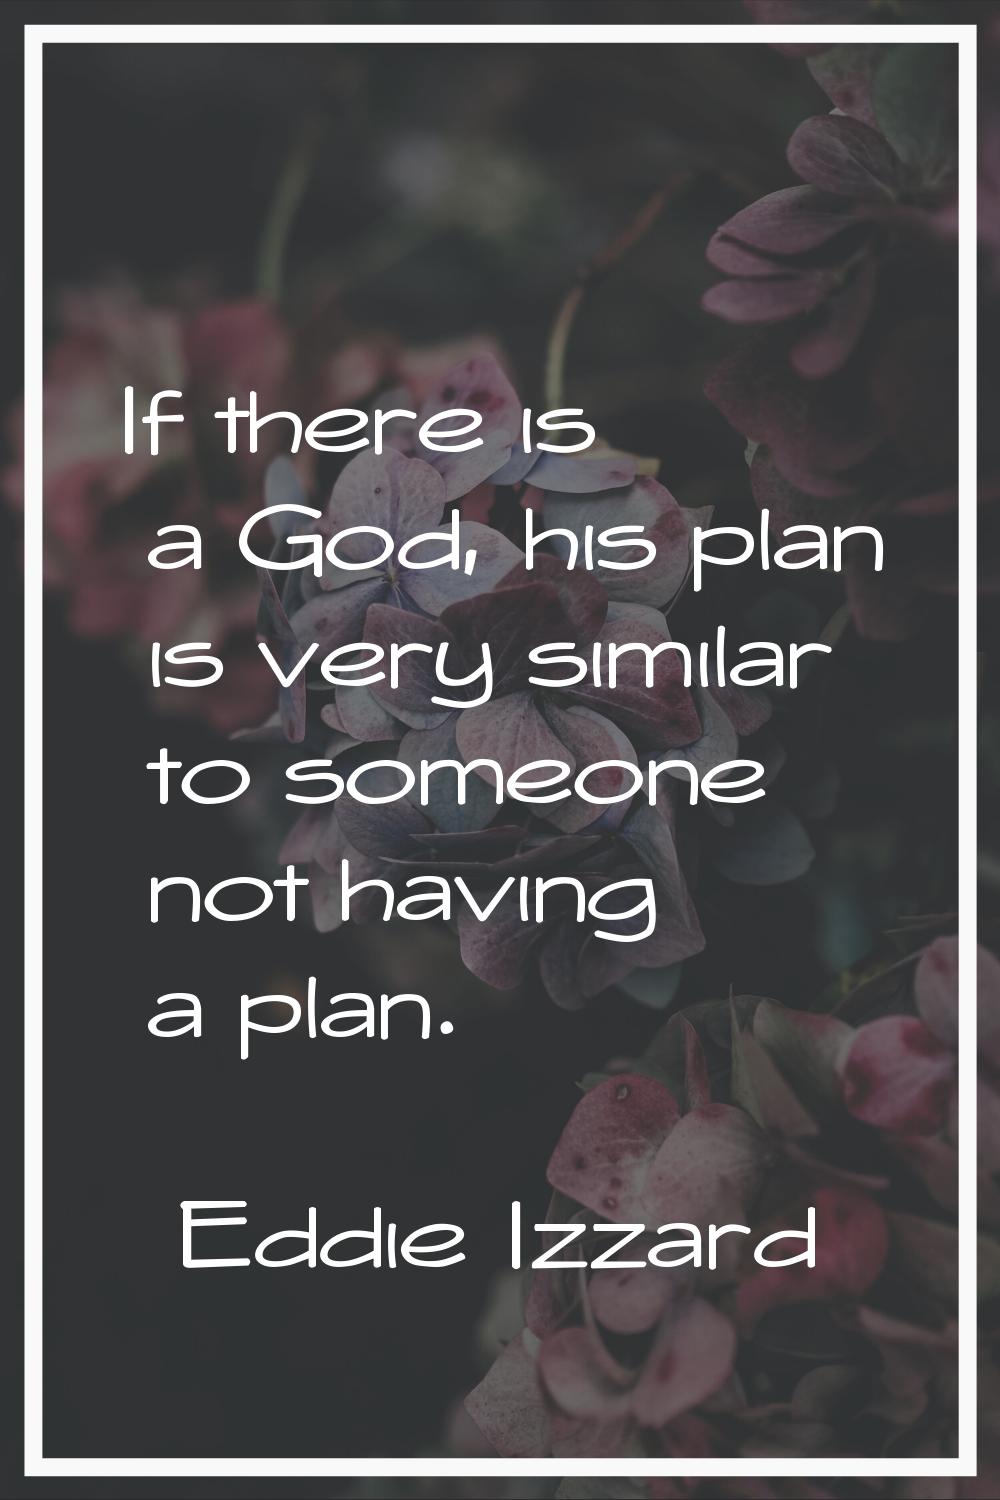 If there is a God, his plan is very similar to someone not having a plan.